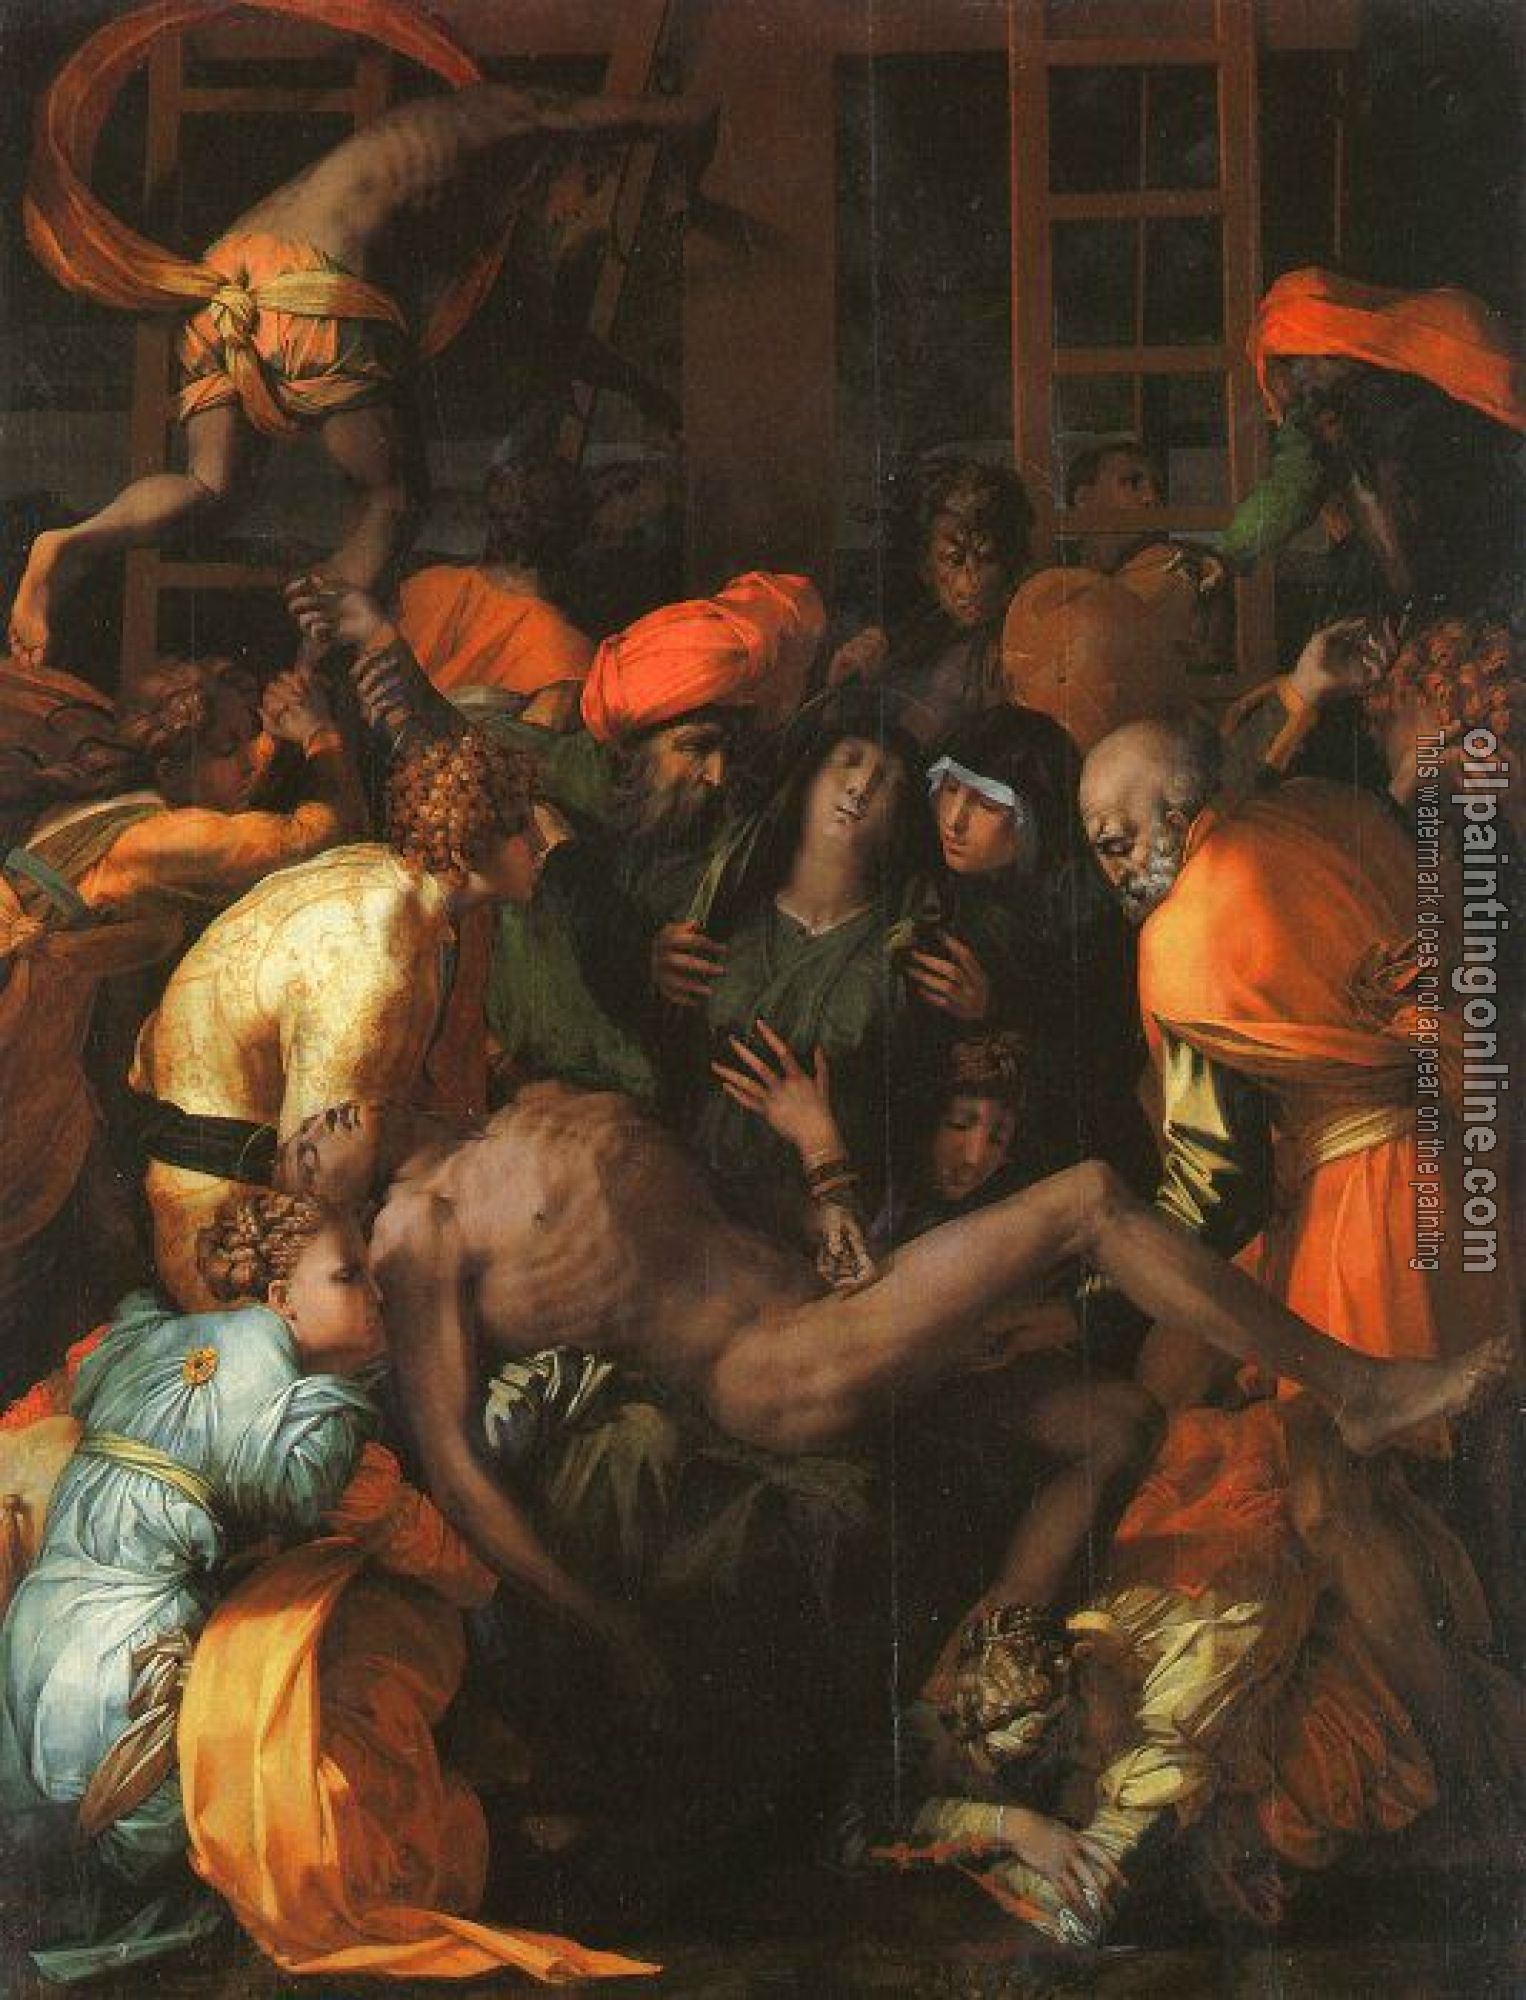 Fiorentino, Rosso - Deposition from the Cross